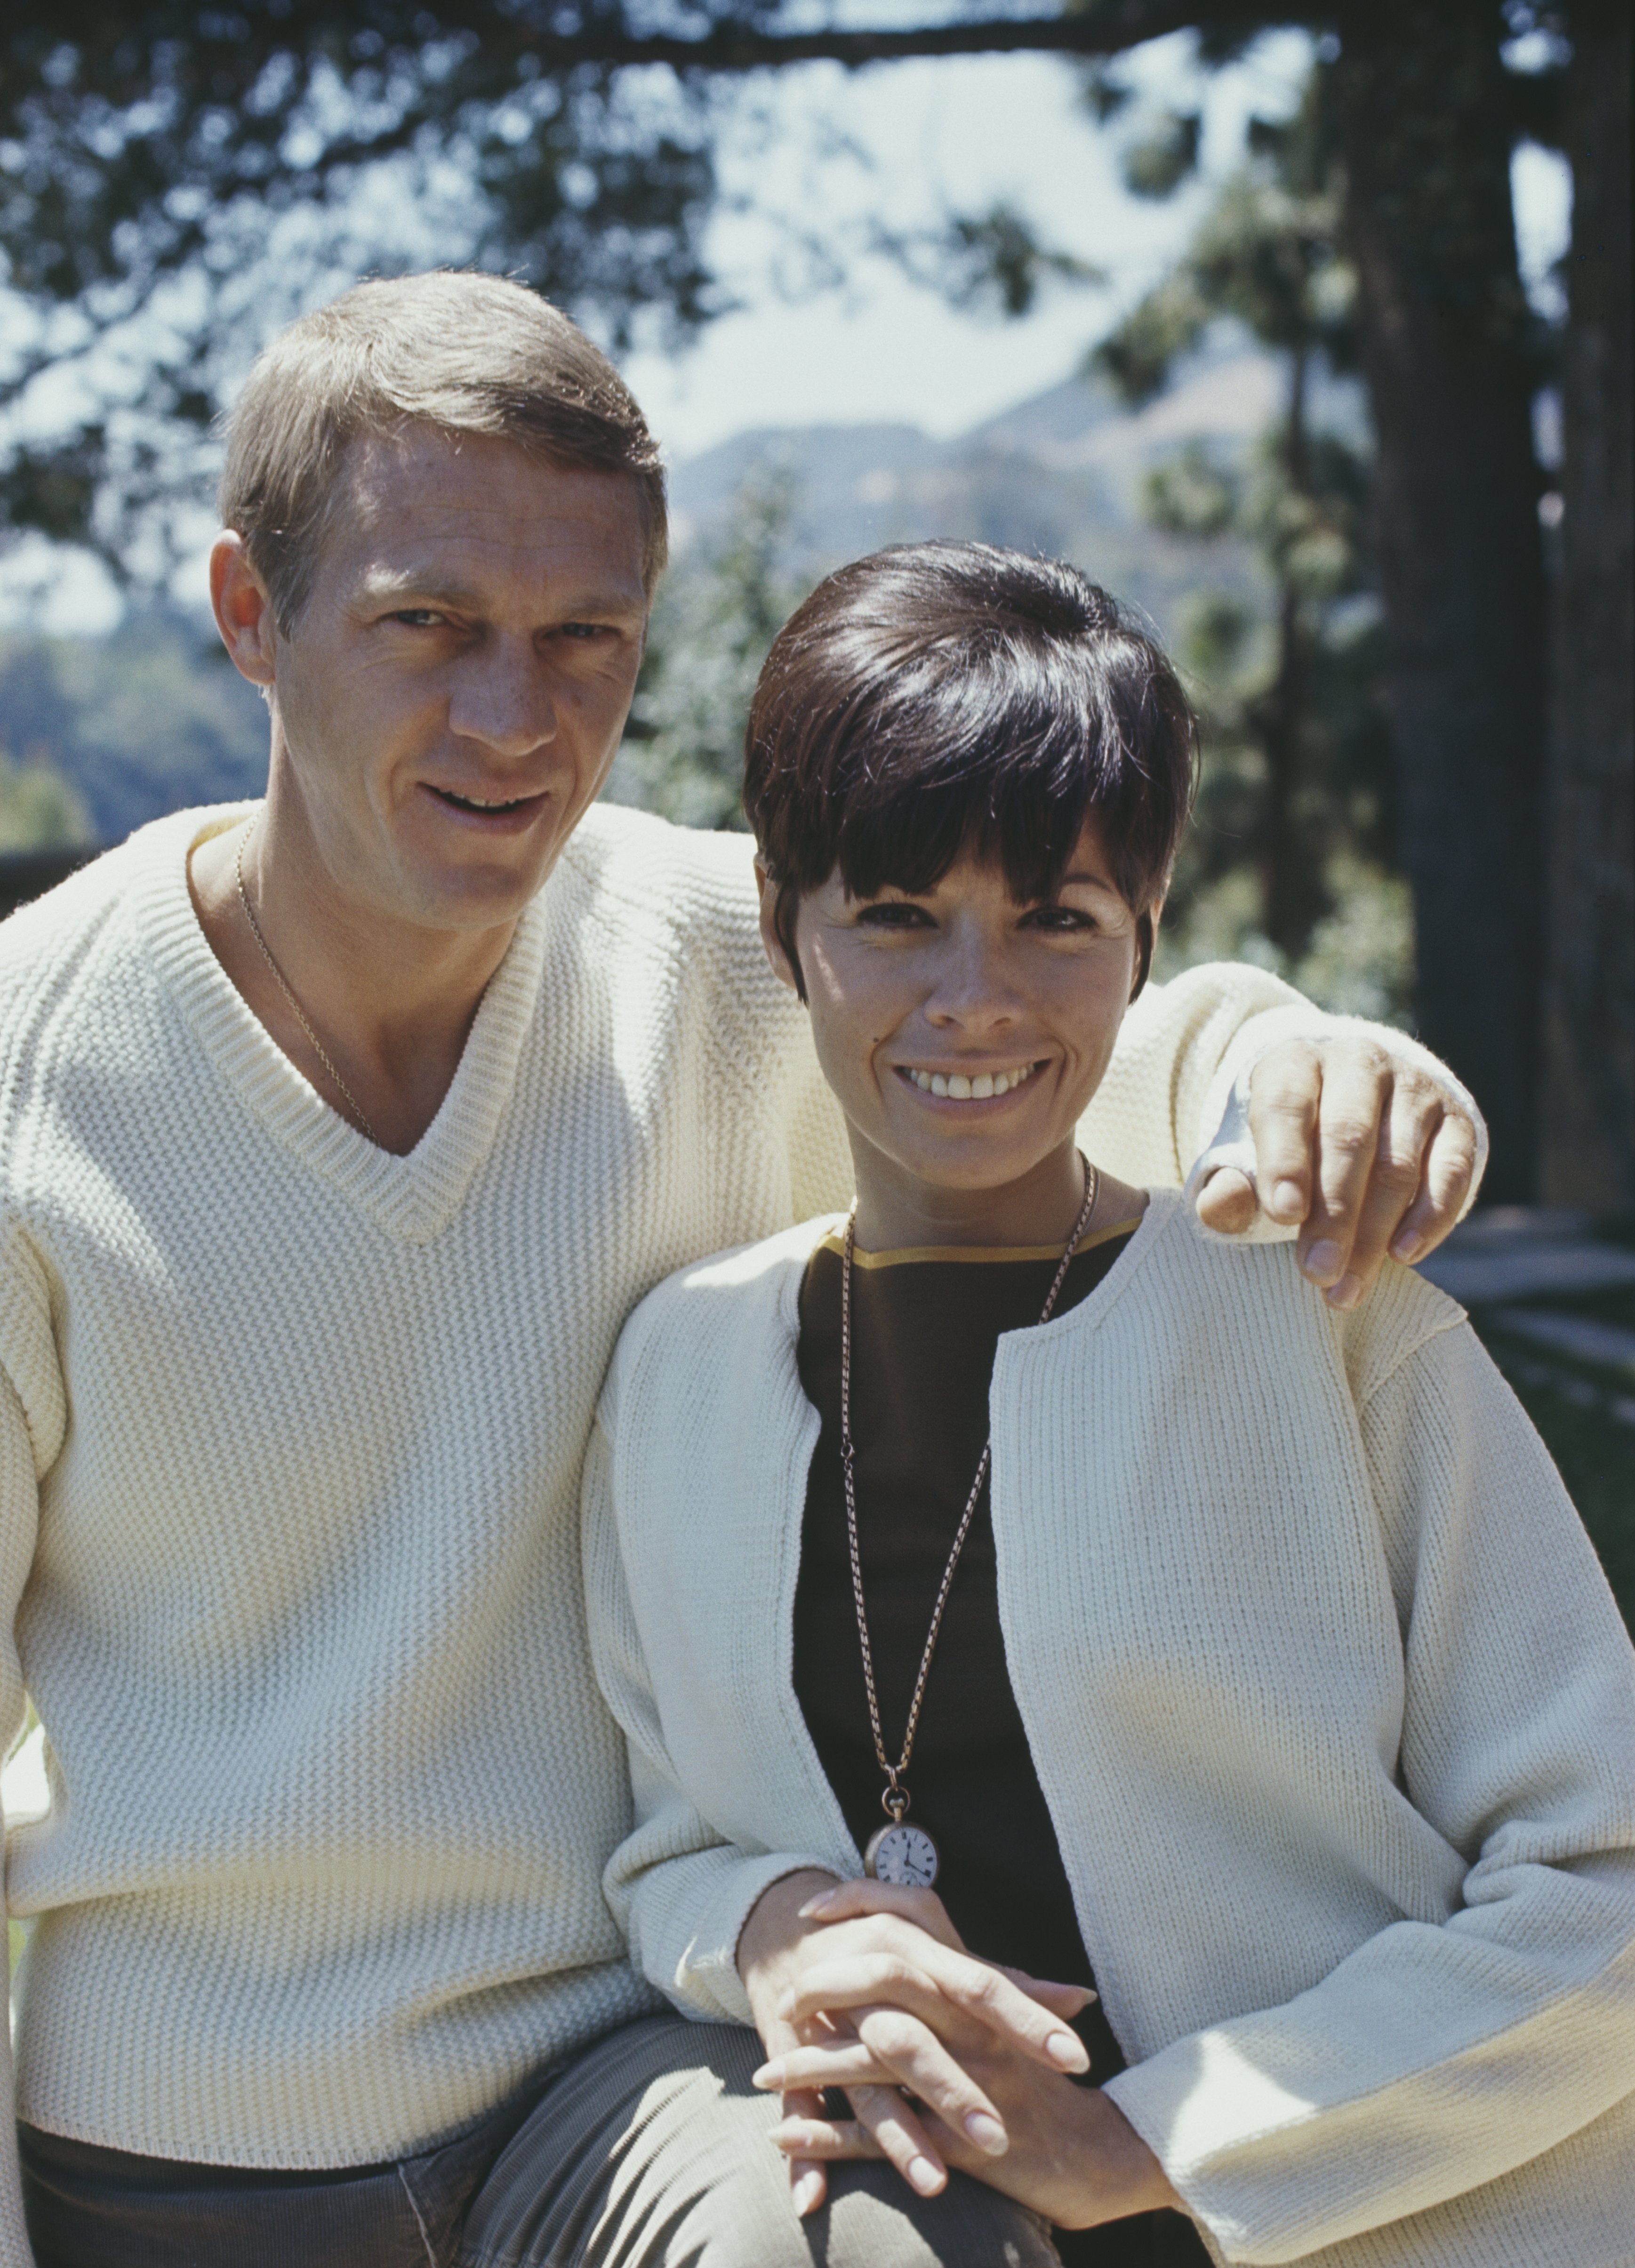 Steve McQueen and Neile Adams photographed in 1965. | Source: Getty Images